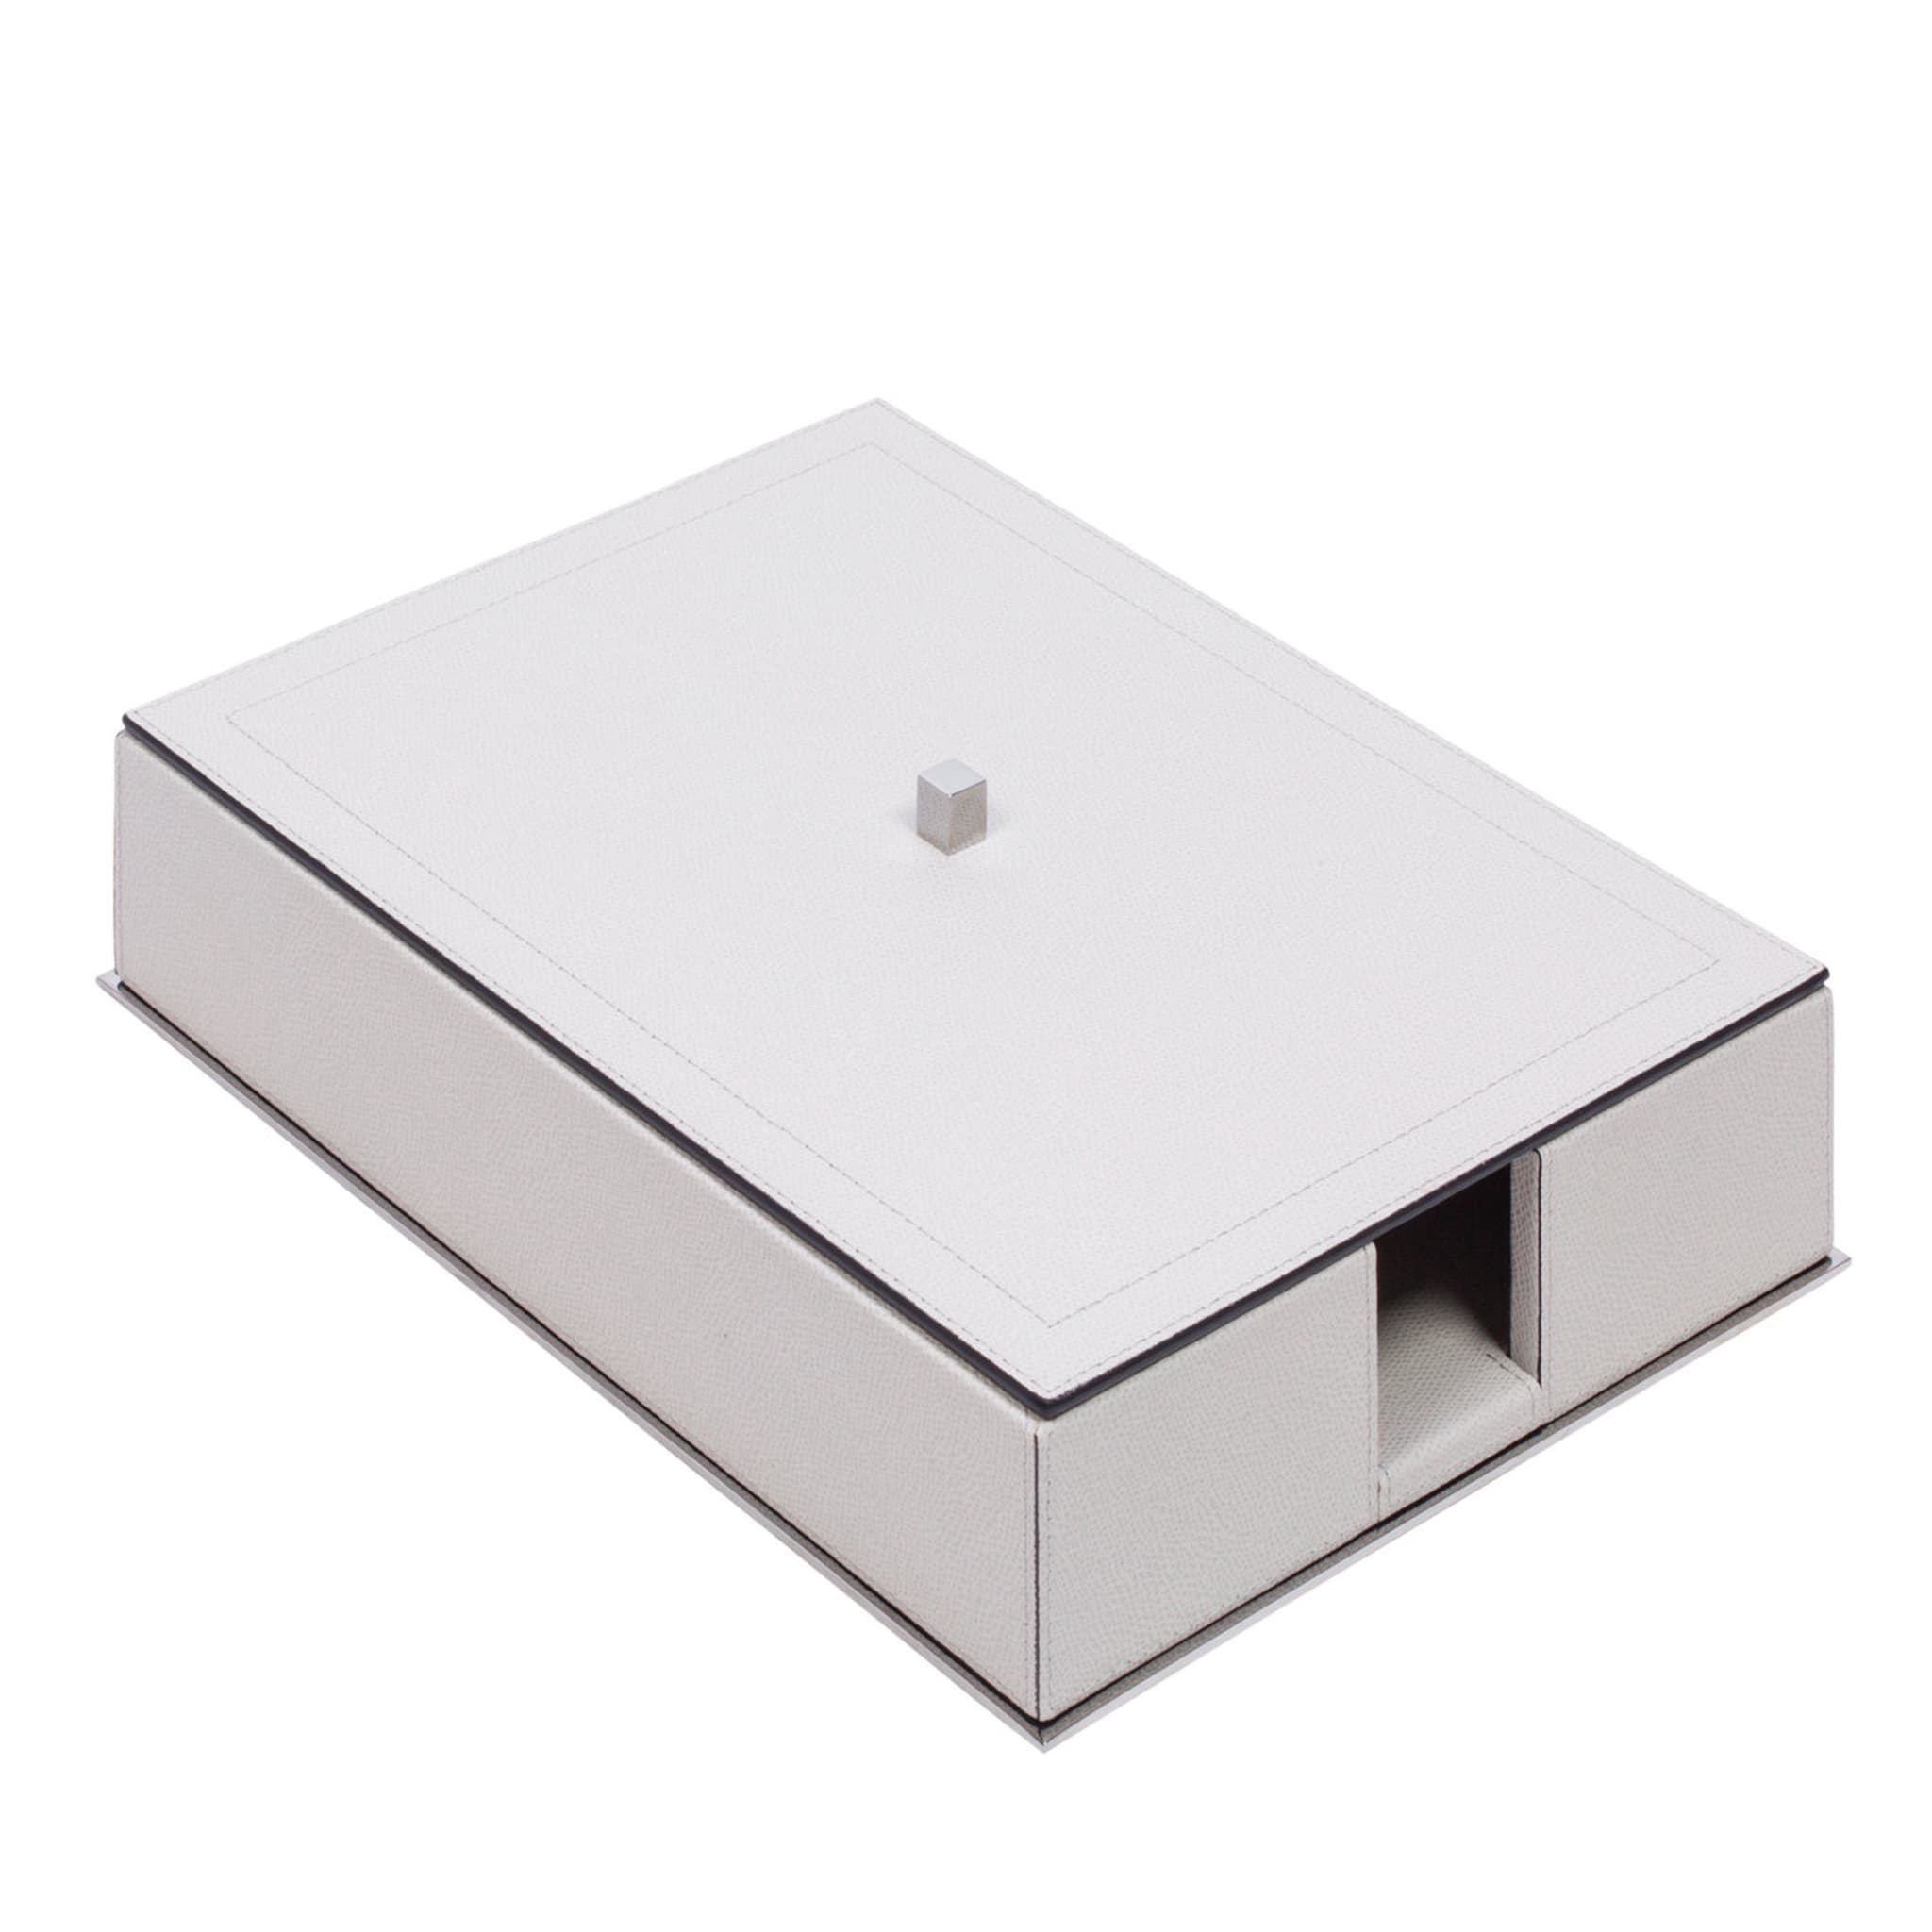 Firenze A4 White Paper Tray with Lid - Main view